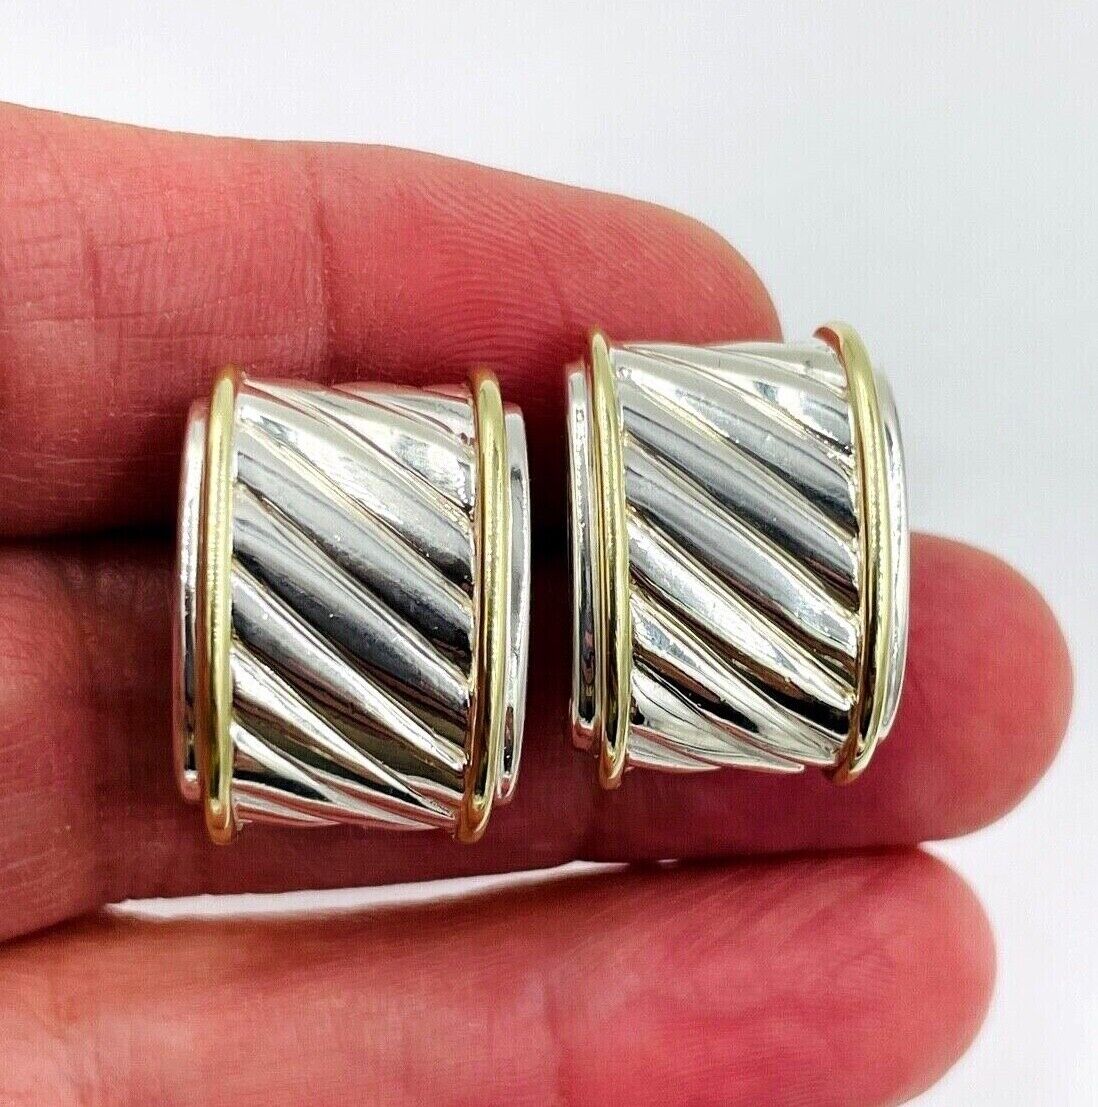 DAVID YURMAN STERLING SILVER 14K YELLOW GOLD THOROUGHBRED CABLE CIGAR EARRINGS